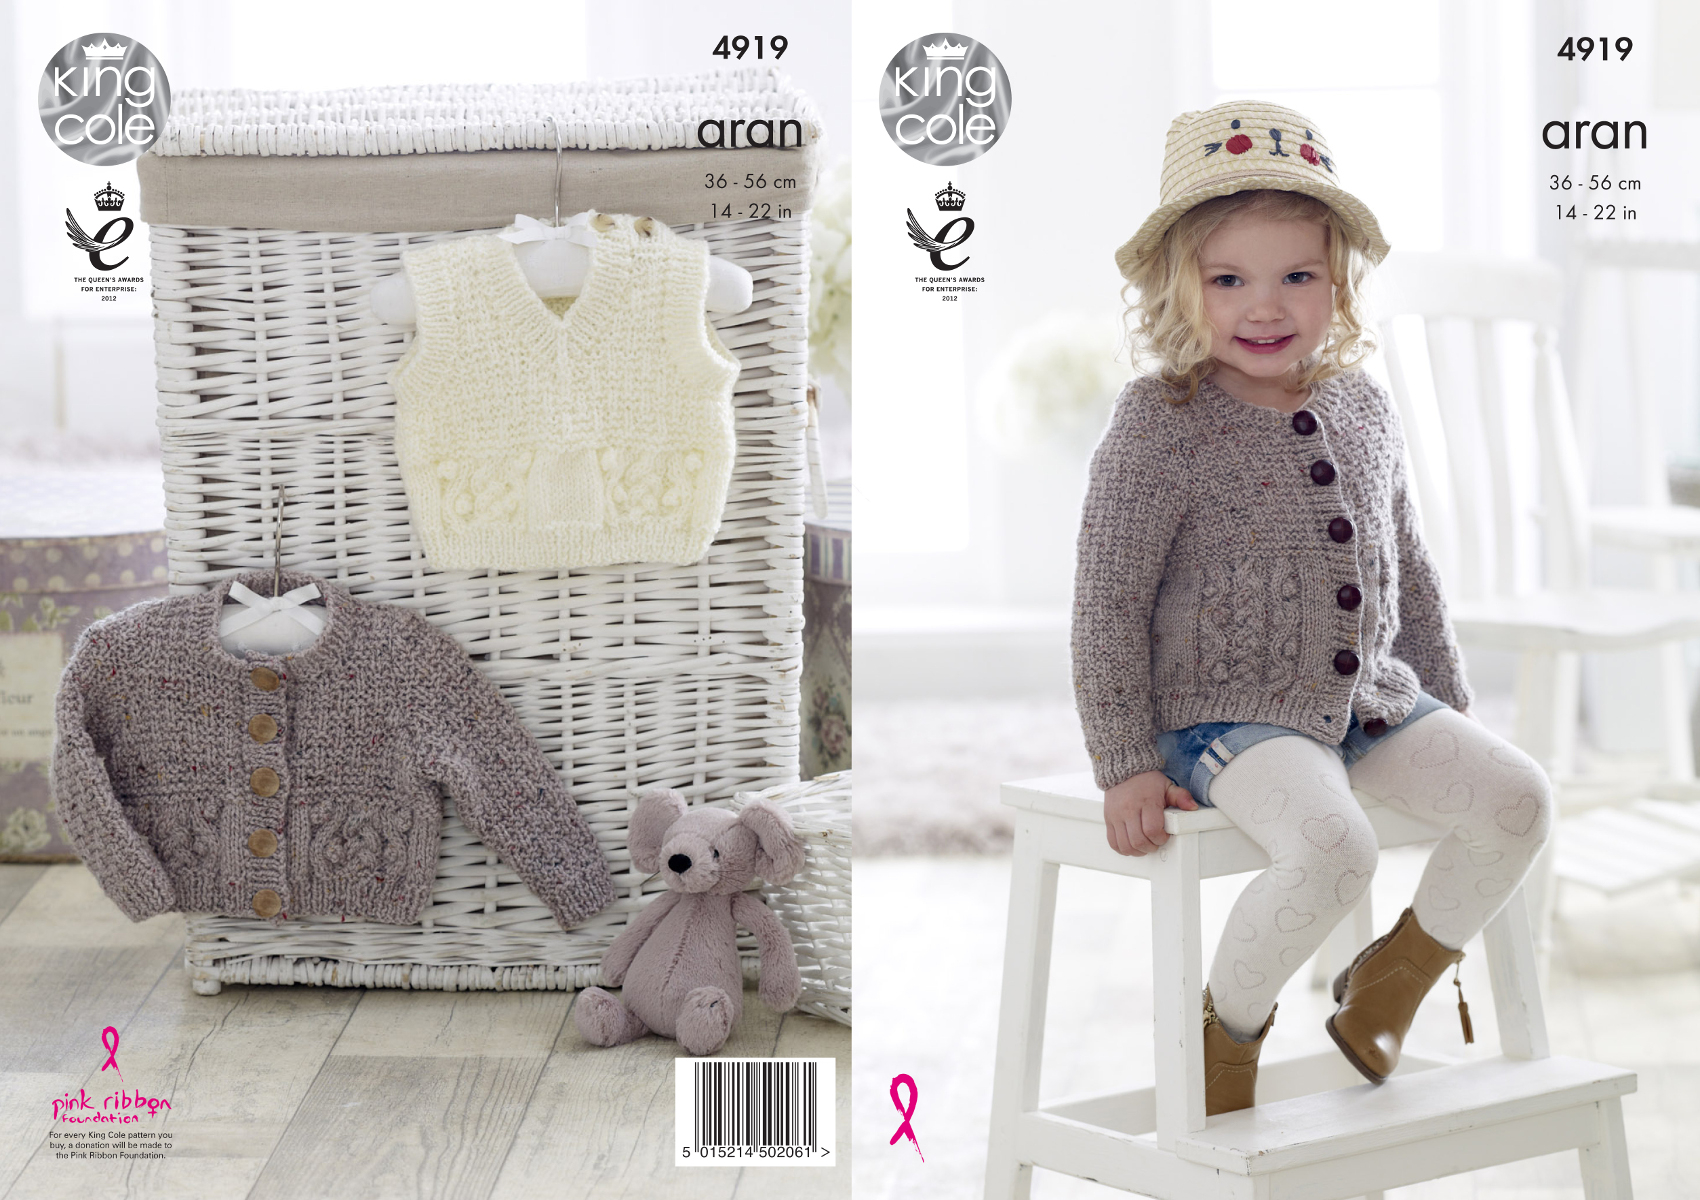 Childrens Aran Knitting Patterns Details About Girls Aran Knitting Pattern Childs Cable Knit Cardigan Slipover King Cole 4919